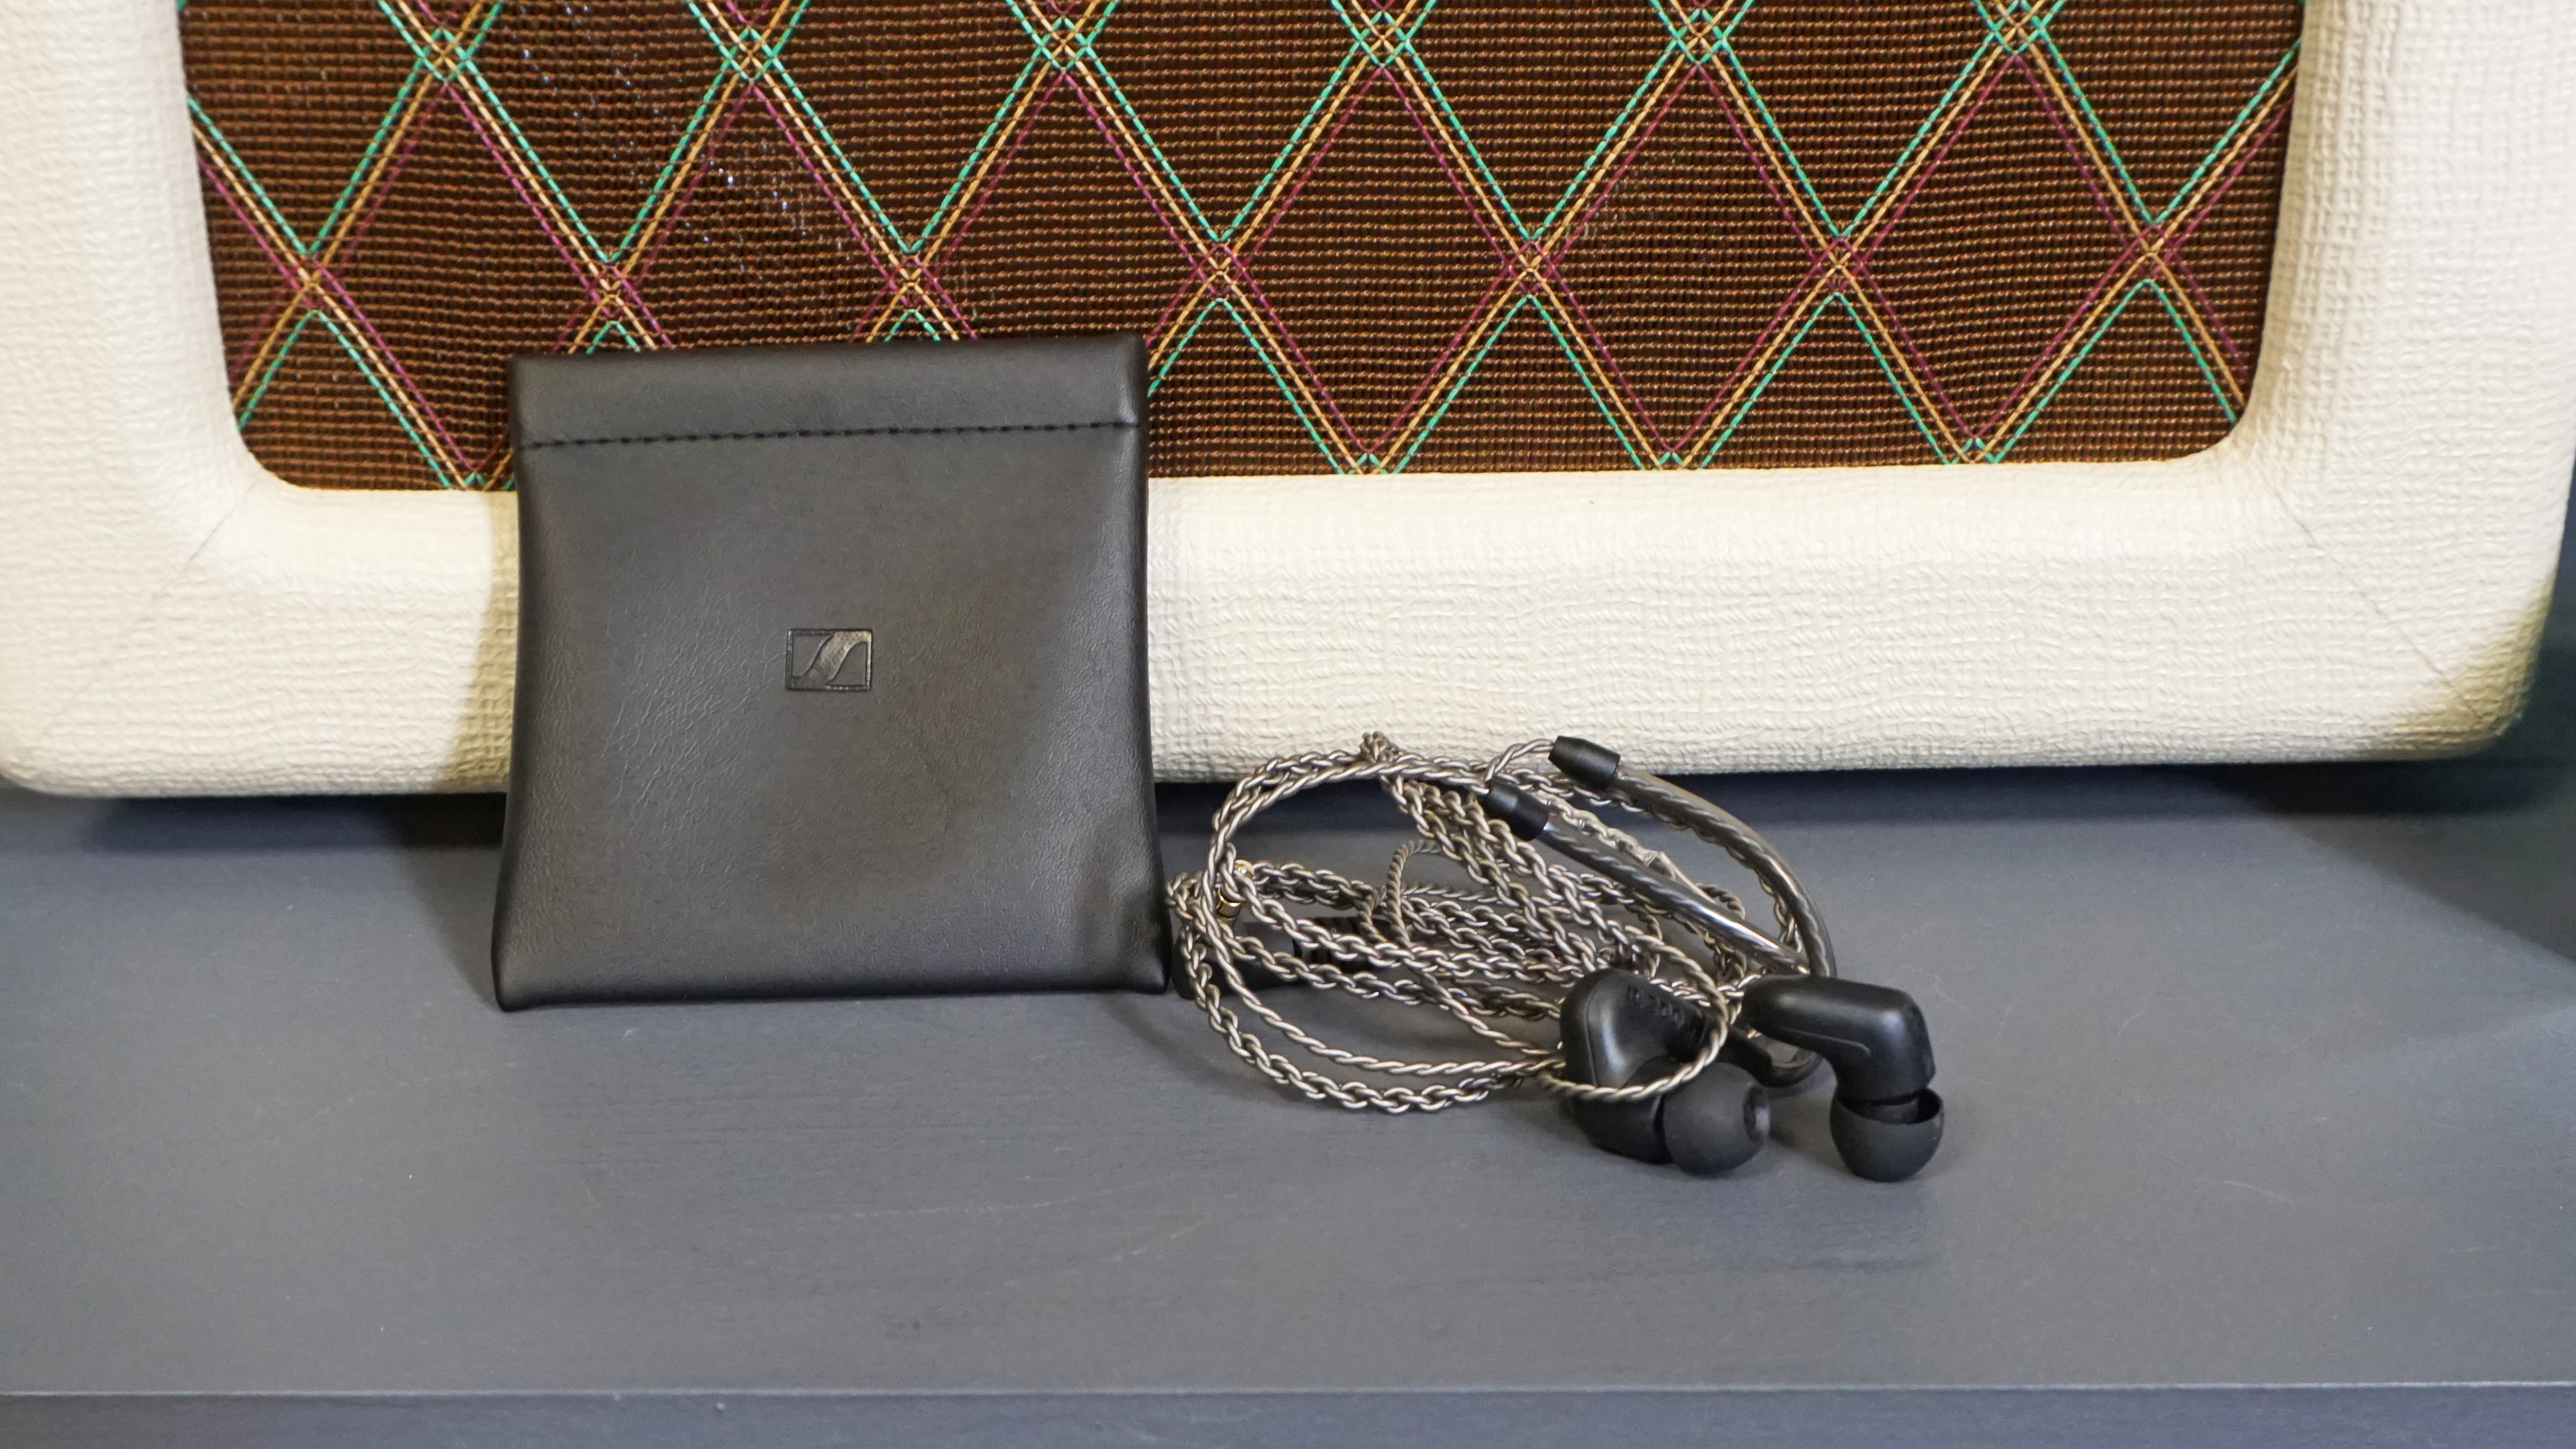 Sennheiser IE 200 next to carry pouch